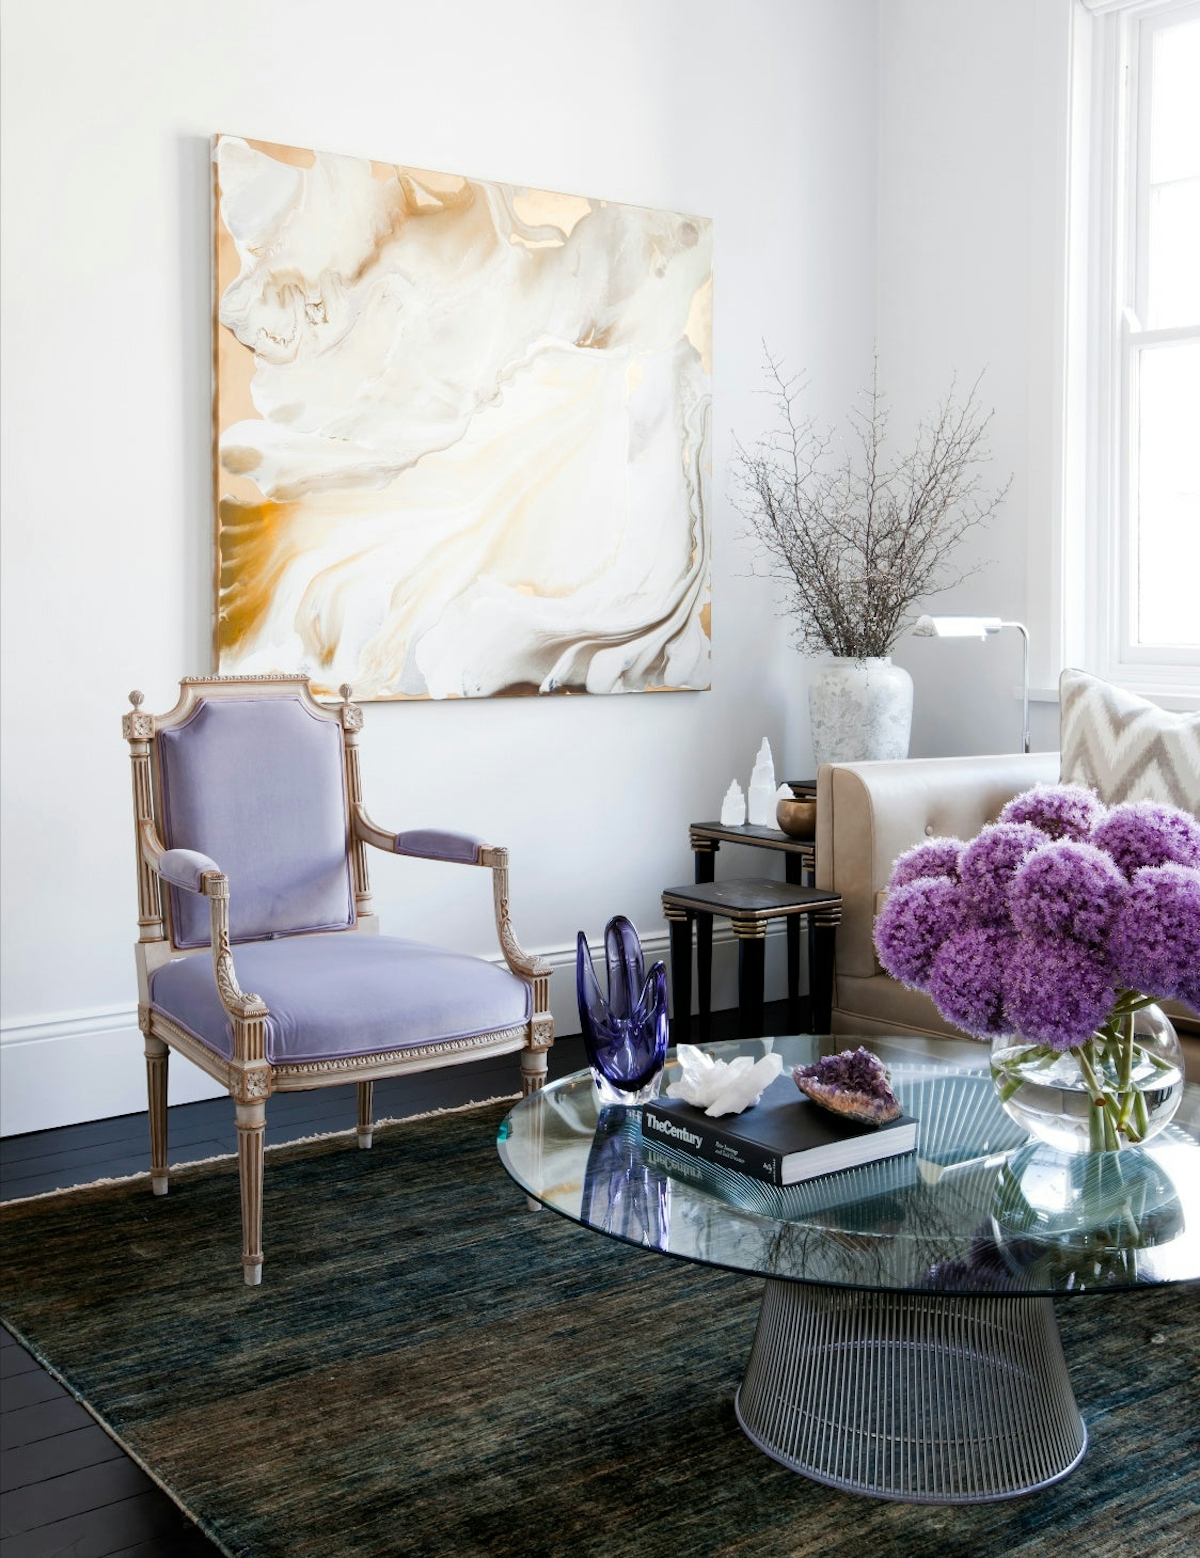 7 Ways To Decorate With Flowers In Your Home Interior - Brendan Wong Design - LuxDeco Style Guide